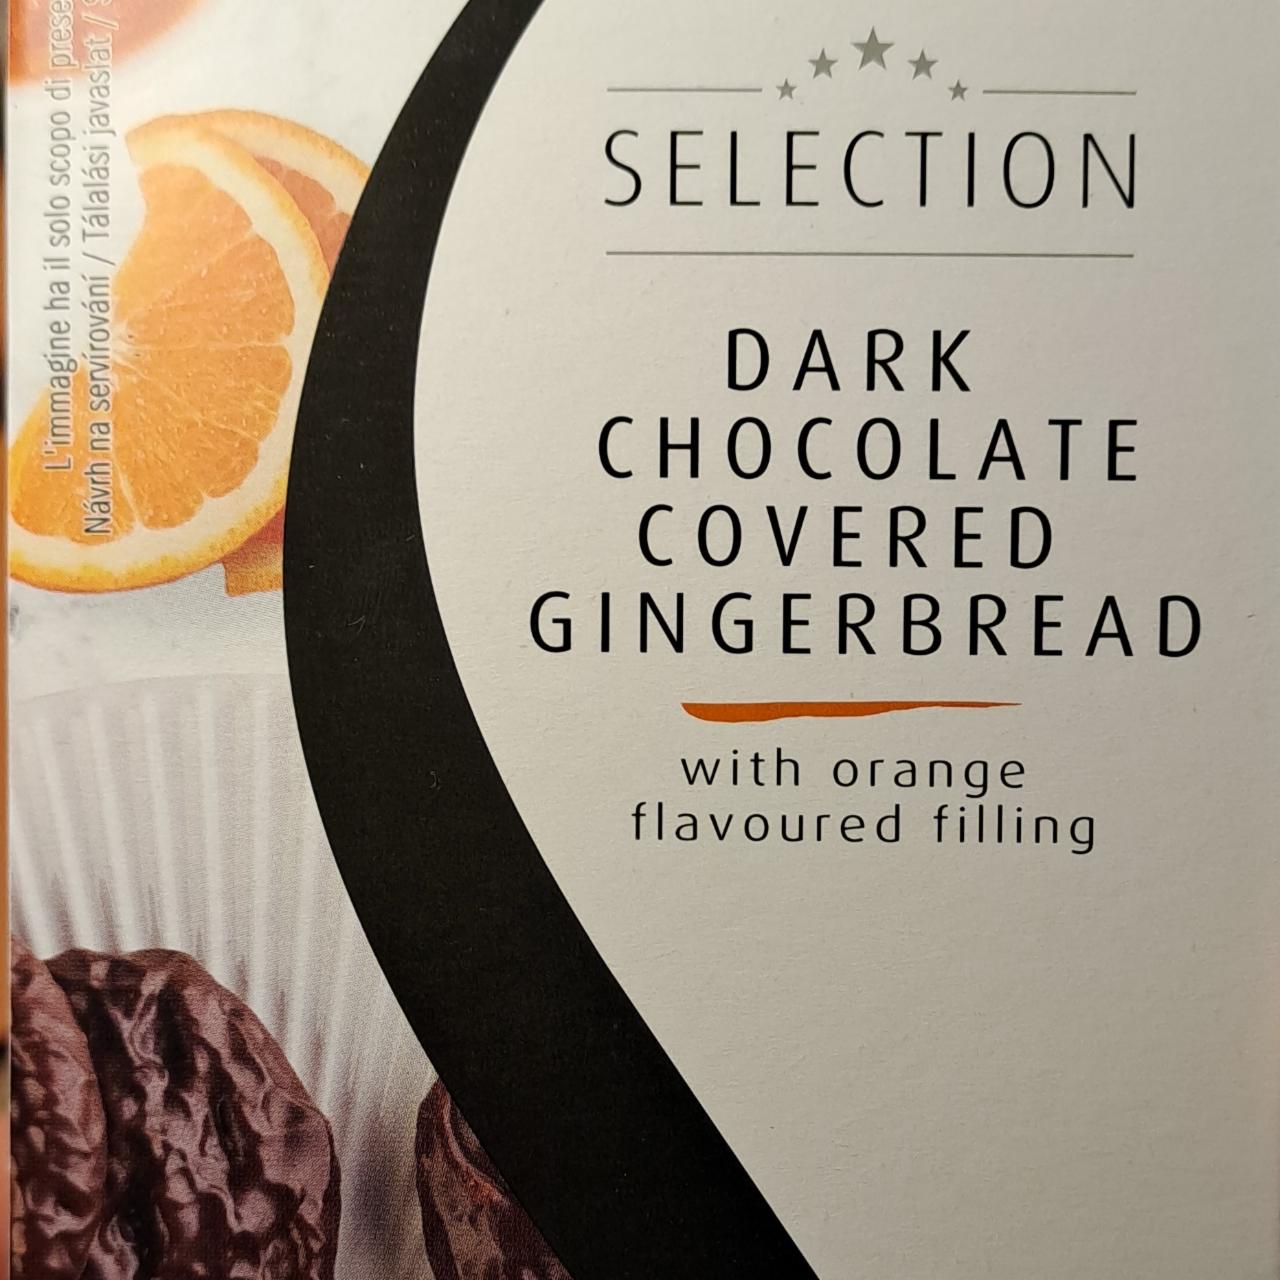 Fotografie - Dark chocolate covered gingerbread with orange flavoured filling Selection